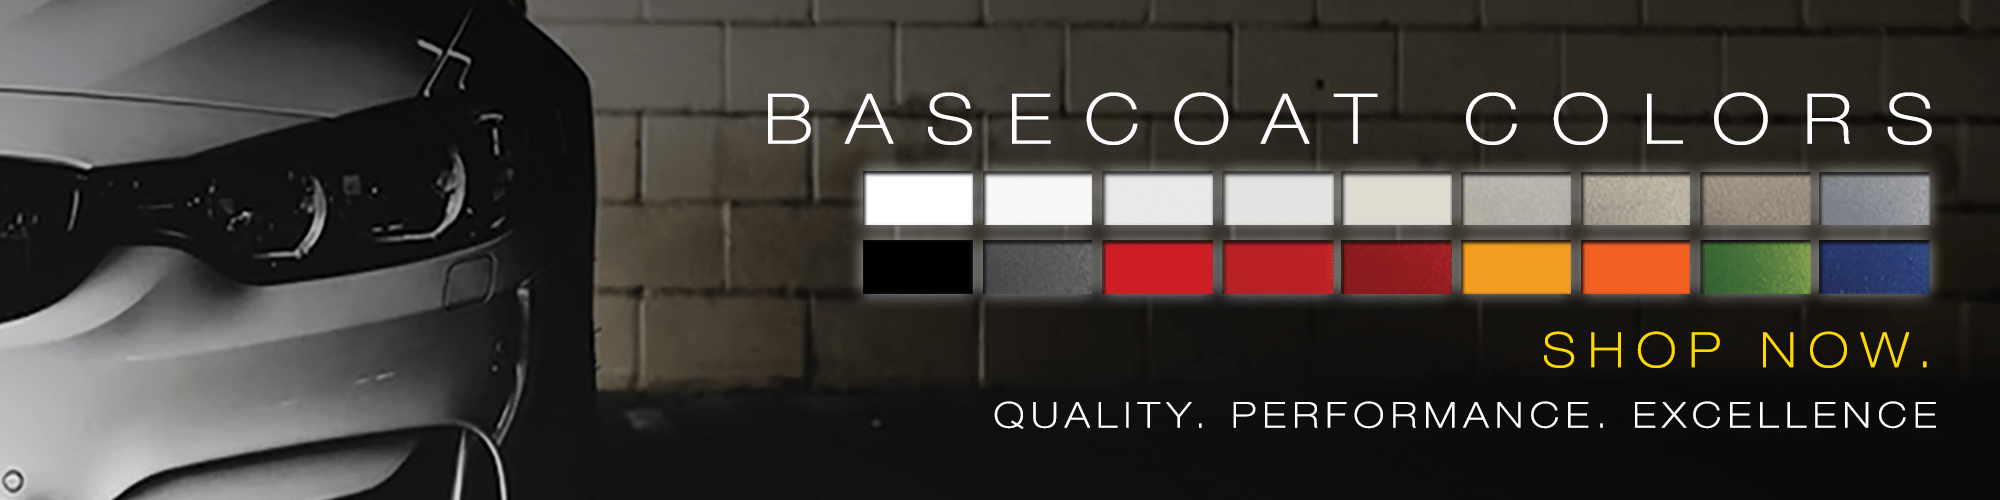 Excel Basecoat products